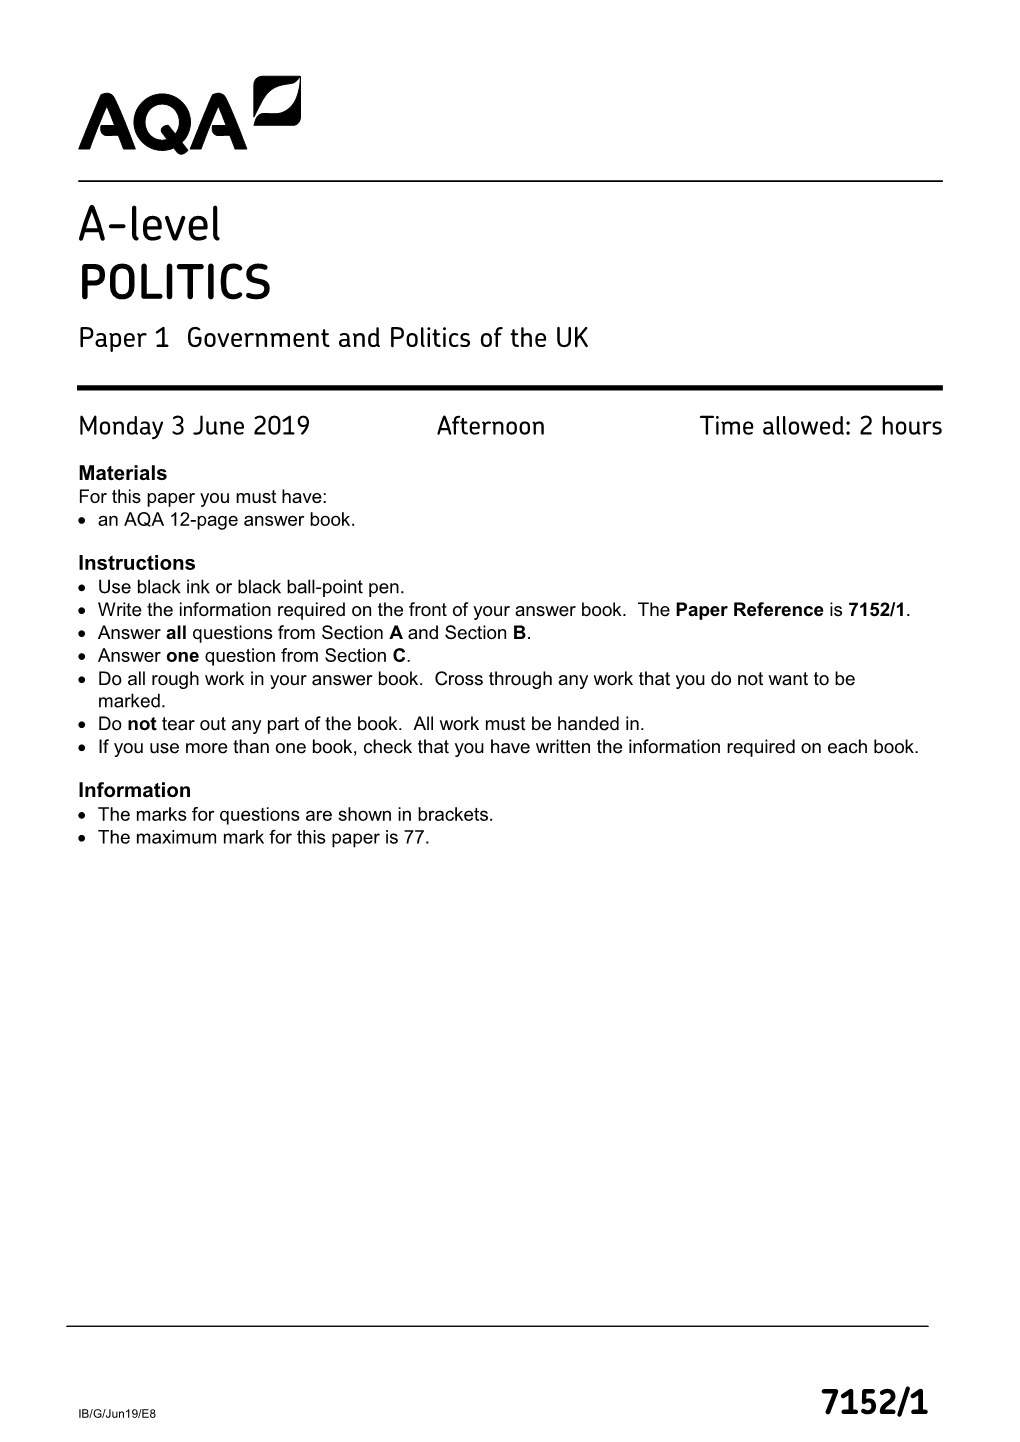 A-Level POLITICS Paper 1 Government and Politics of the UK